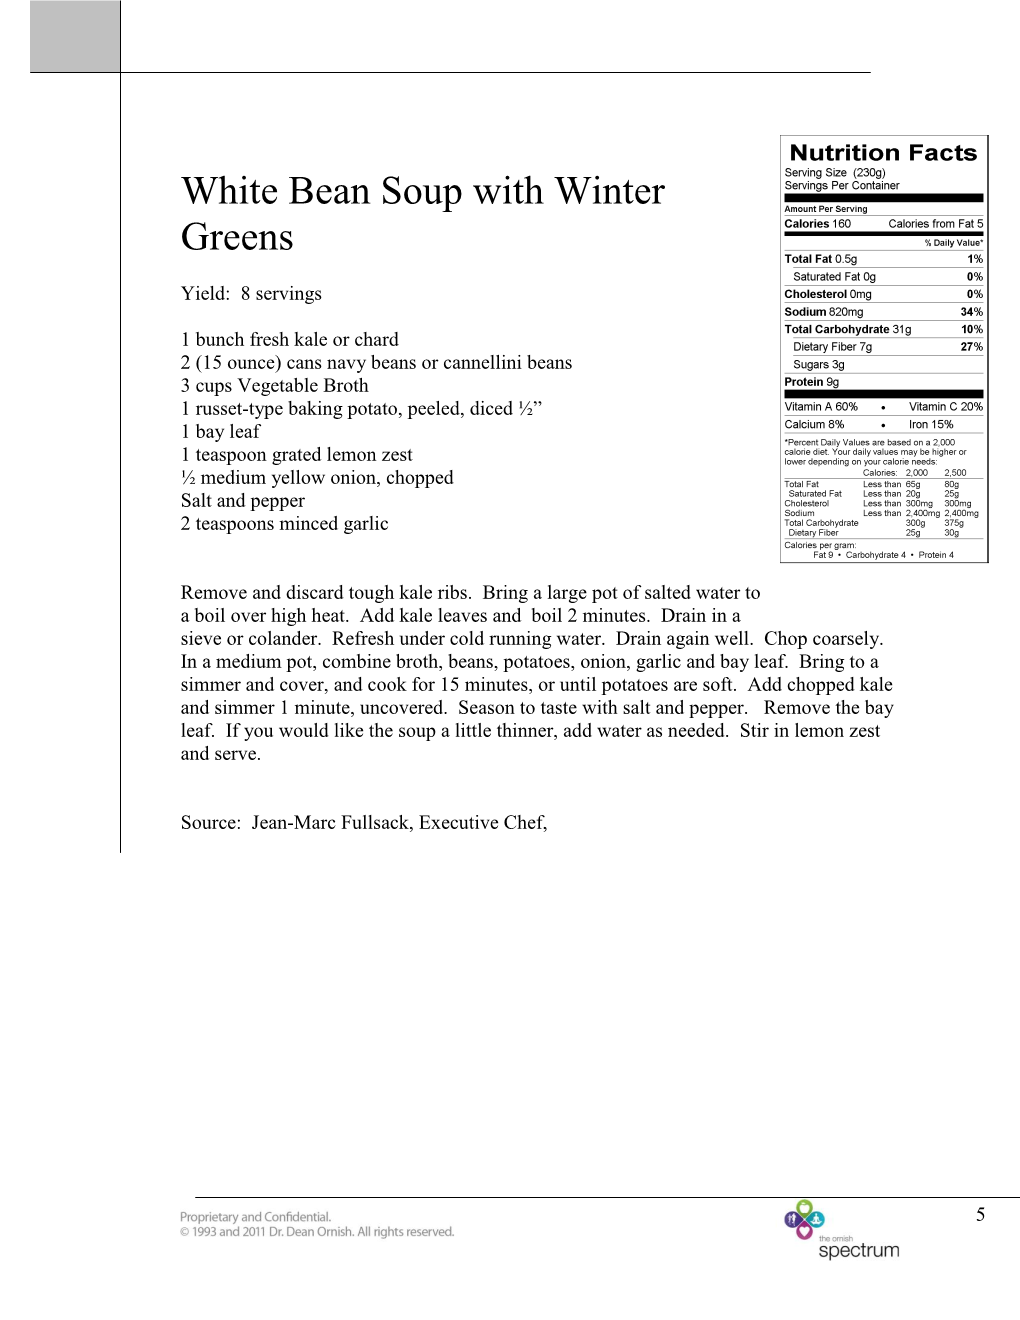 White Bean Soup with Winter Greens